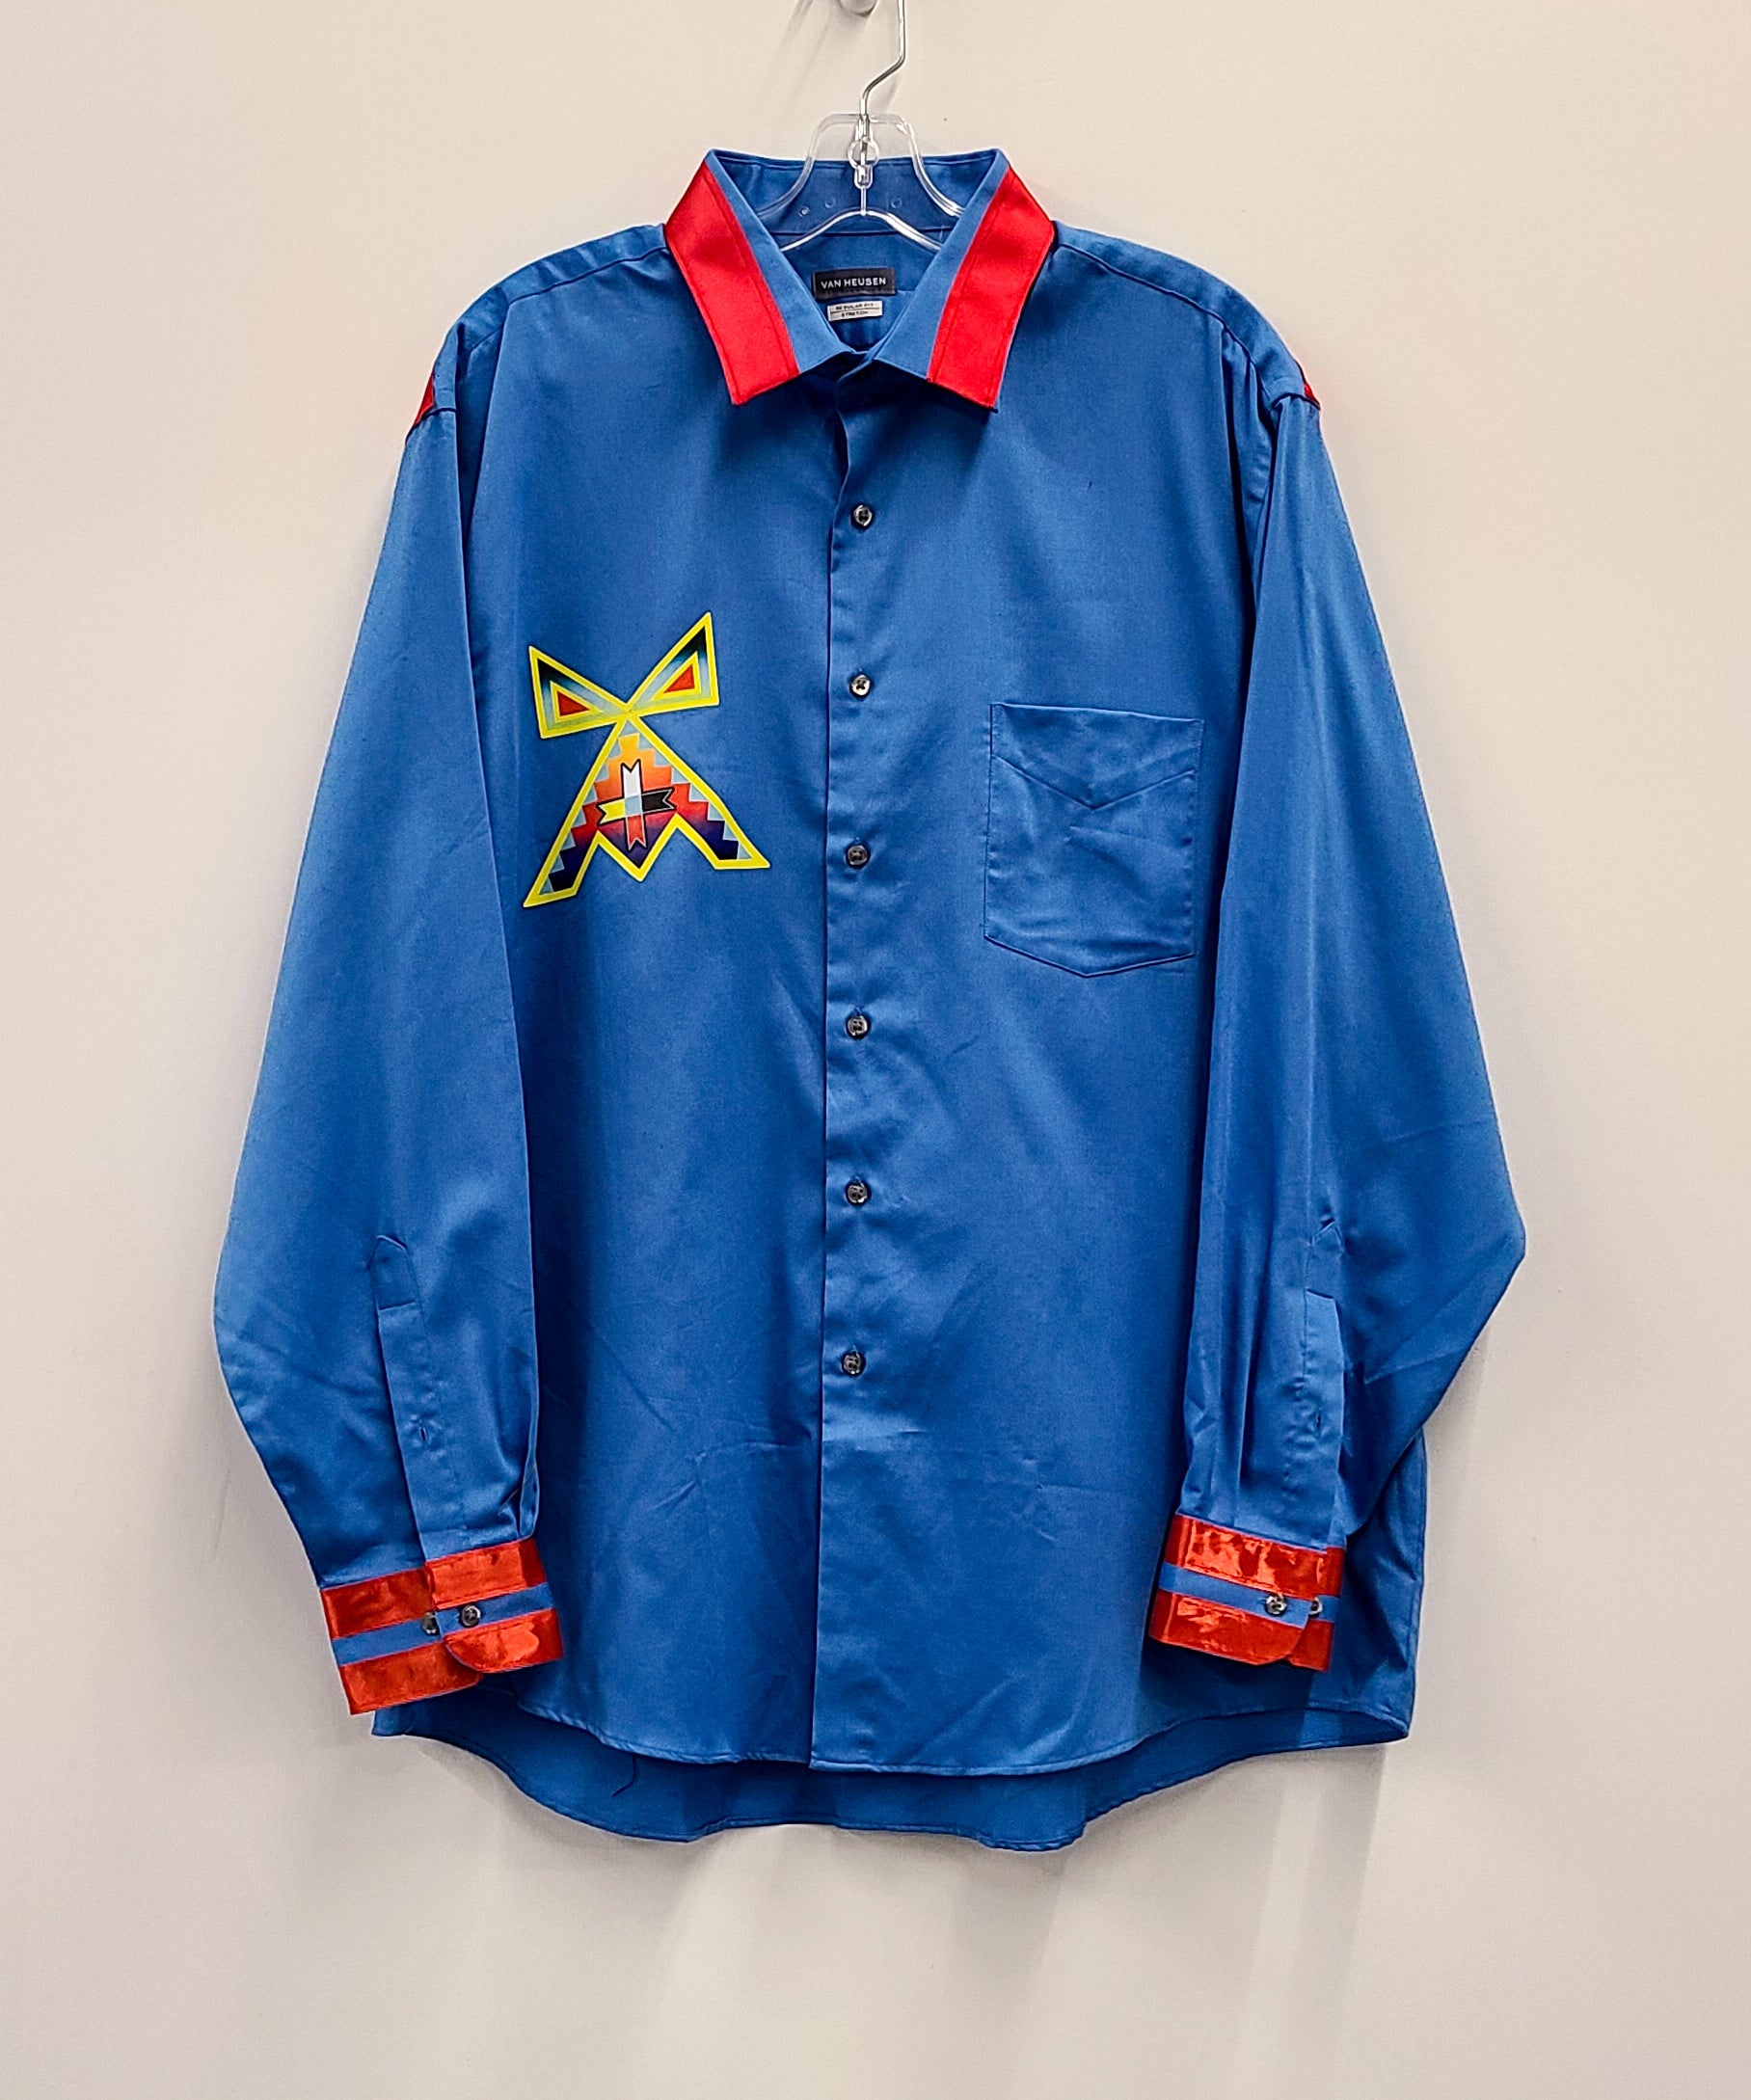 Long Sleeve Button-up Shirts with Ribbon and Heat Transfers